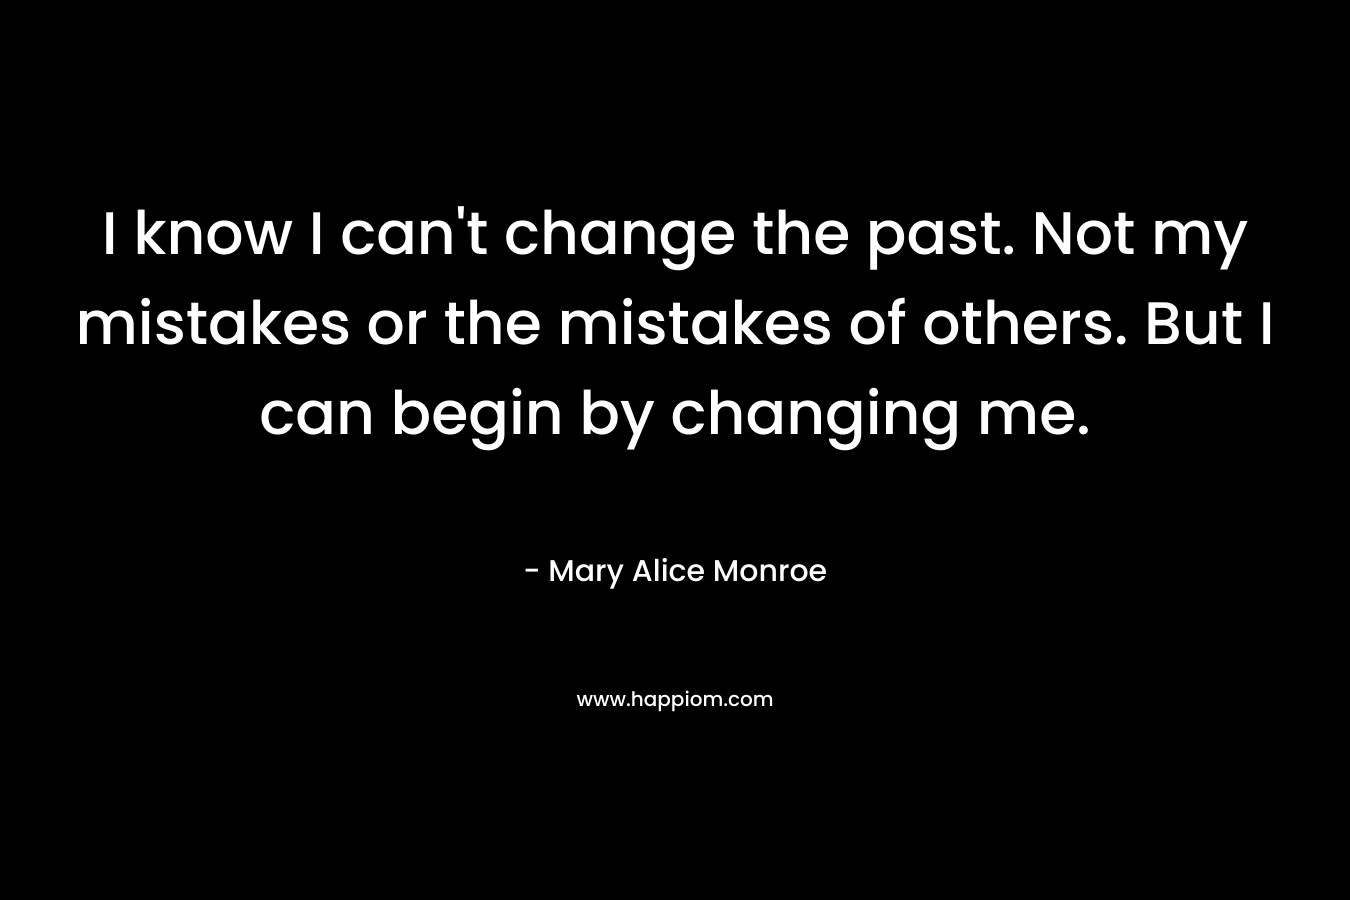 I know I can't change the past. Not my mistakes or the mistakes of others. But I can begin by changing me.